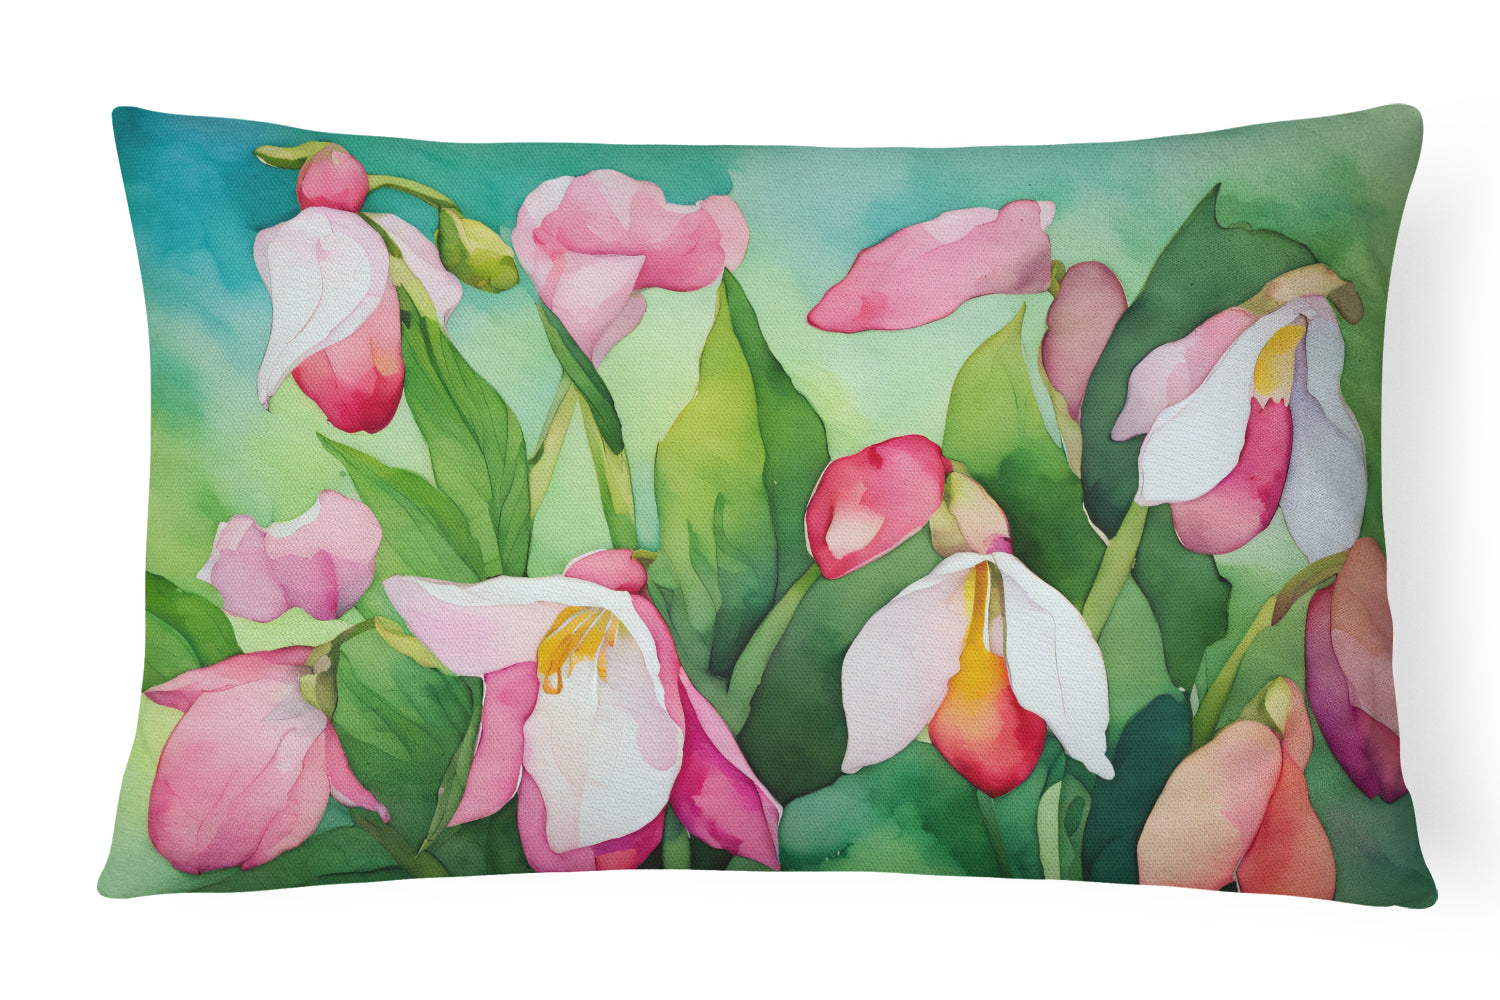 Buy this Minnesota Pink and White Lady’s Slippers in Watercolor Fabric Decorative Pillow